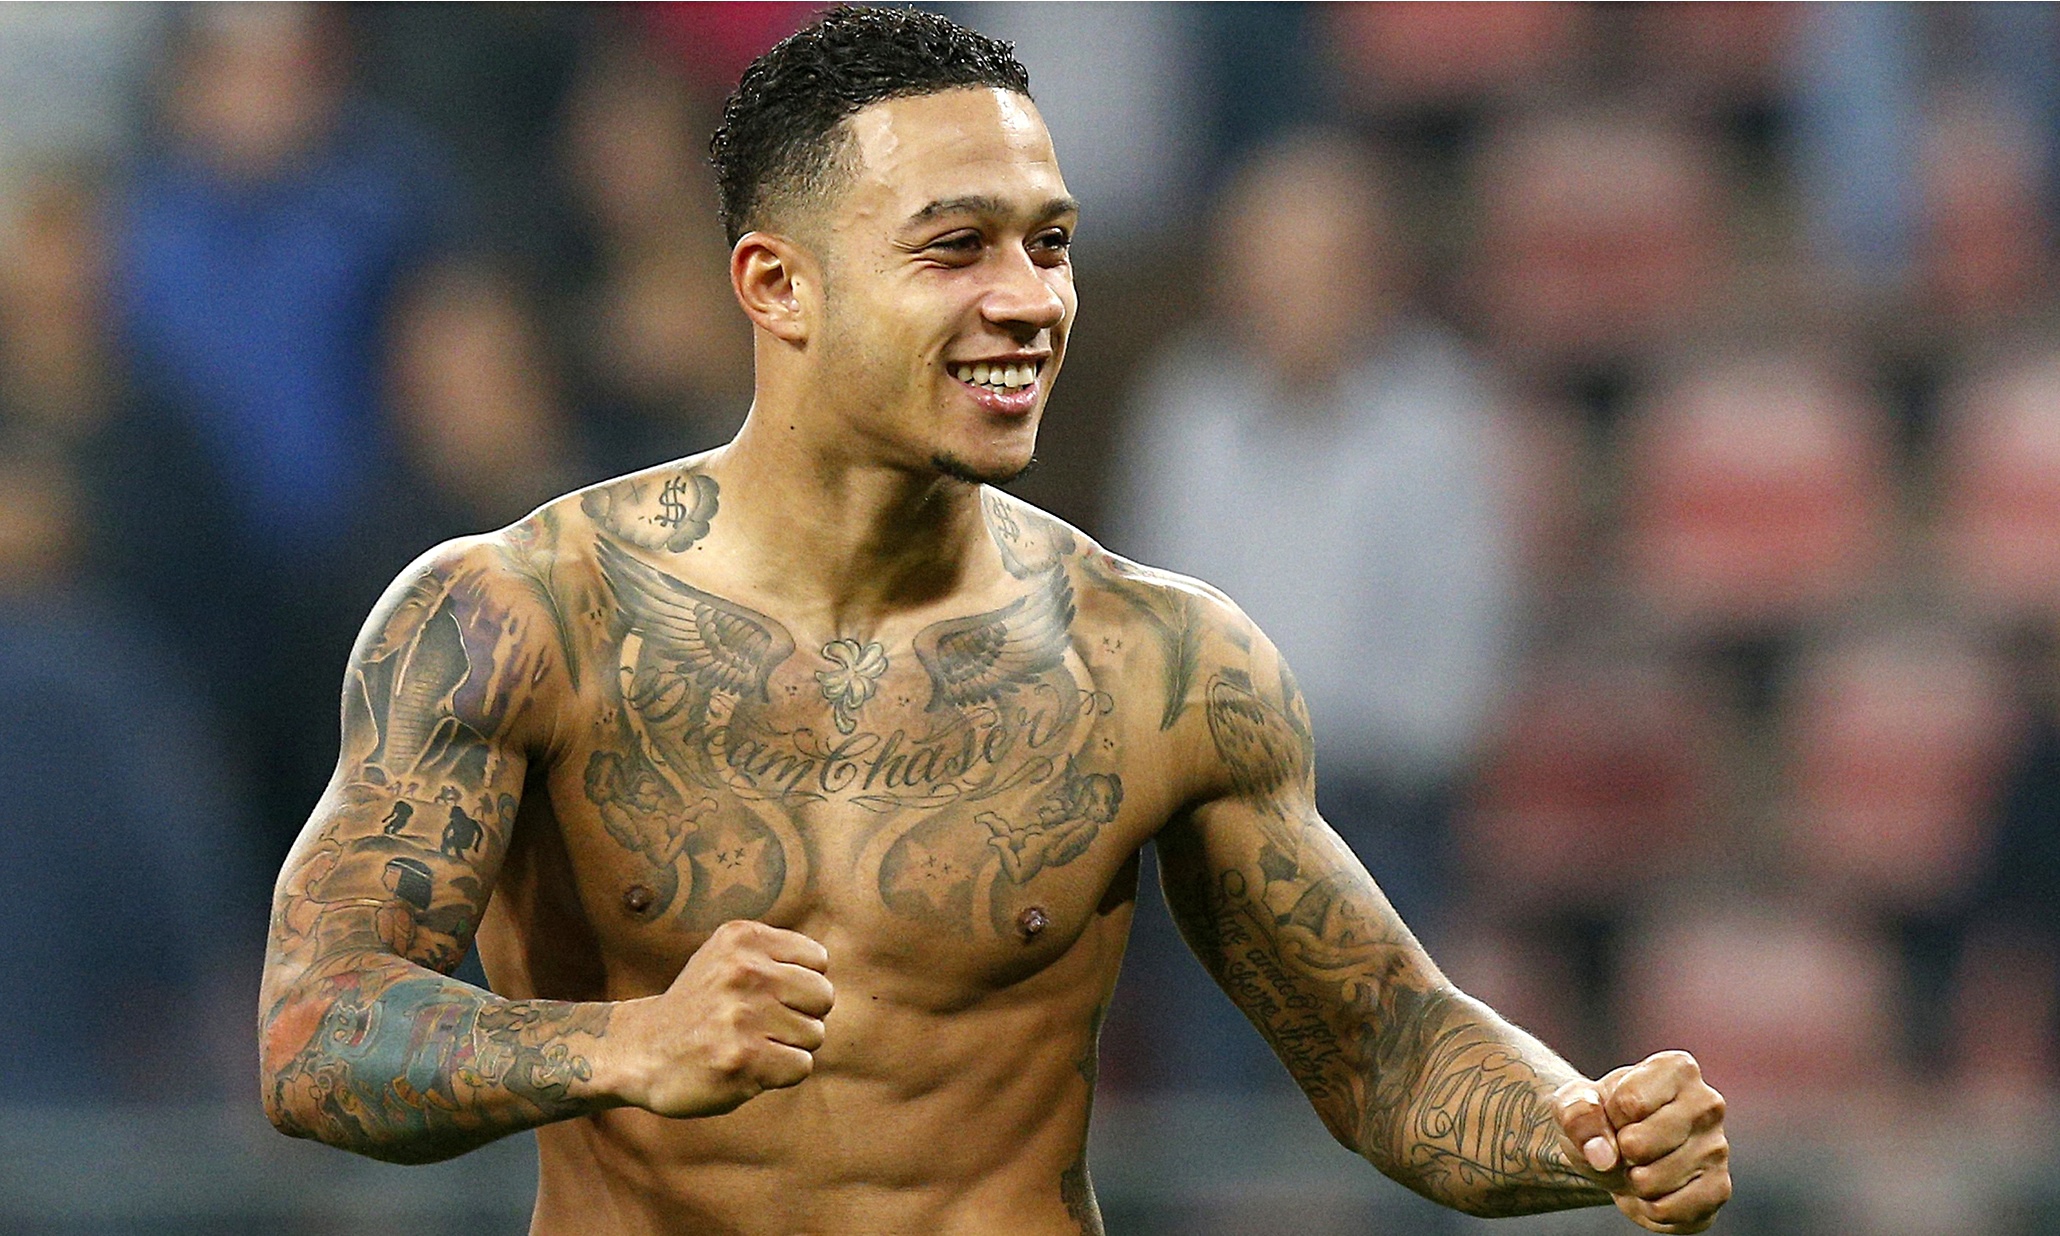 Manchester United’s Memphis Depay: the dream chaser who defied the odds